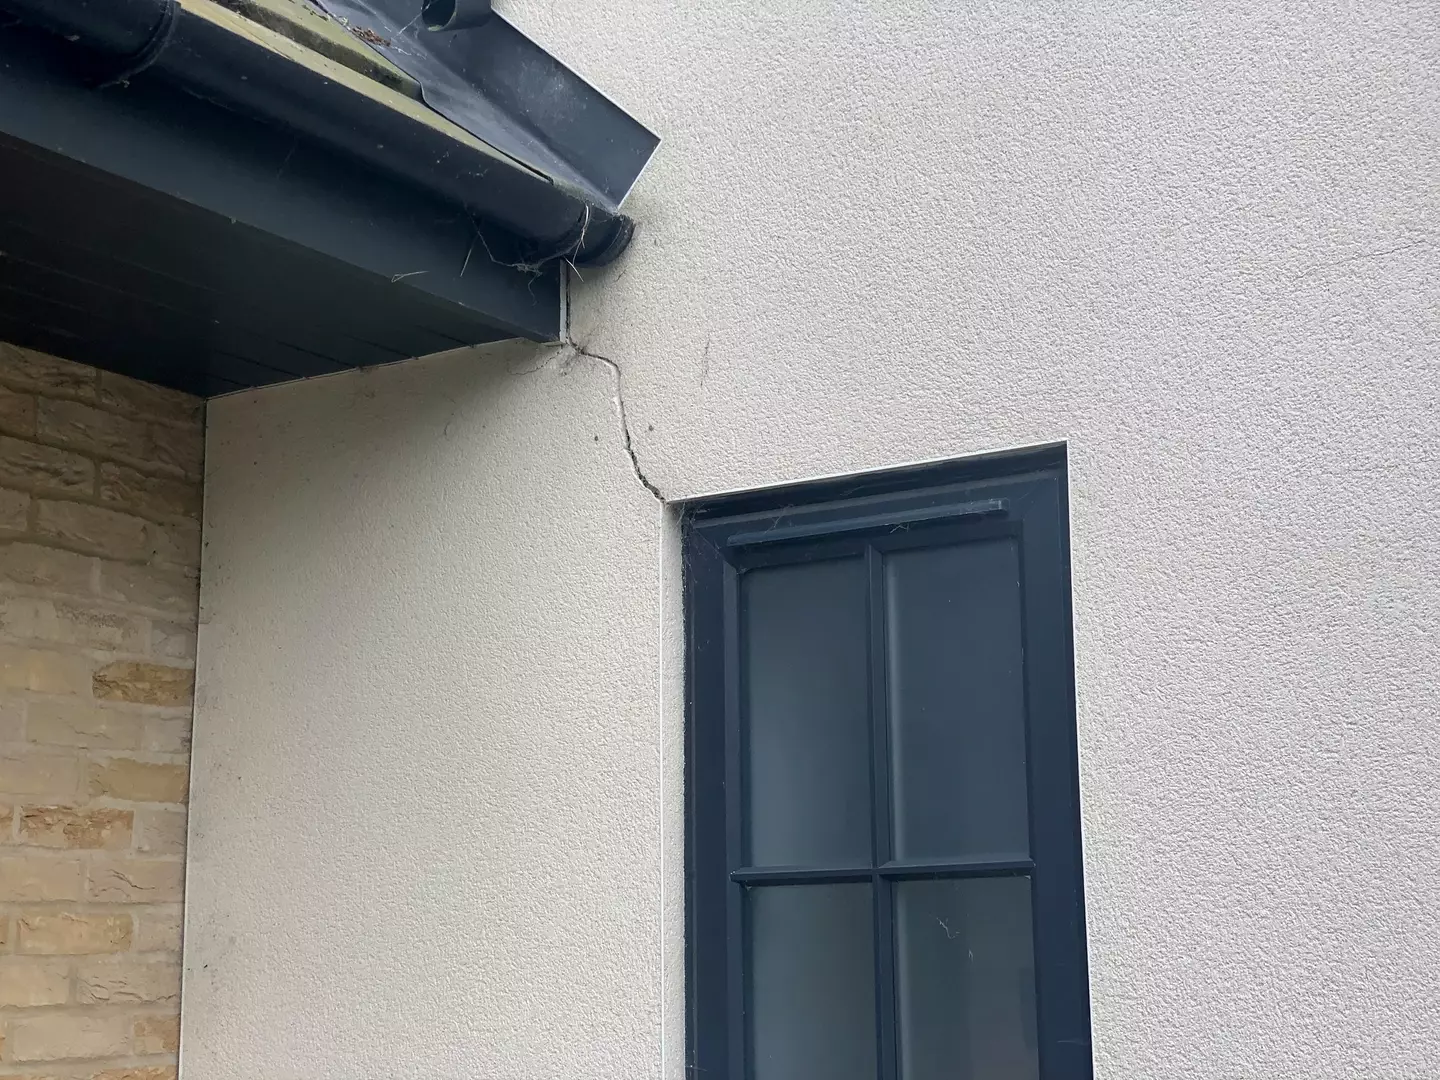 They purchased the detached property in 2018, but the Cambridgeshire home is now riddled with cracks.